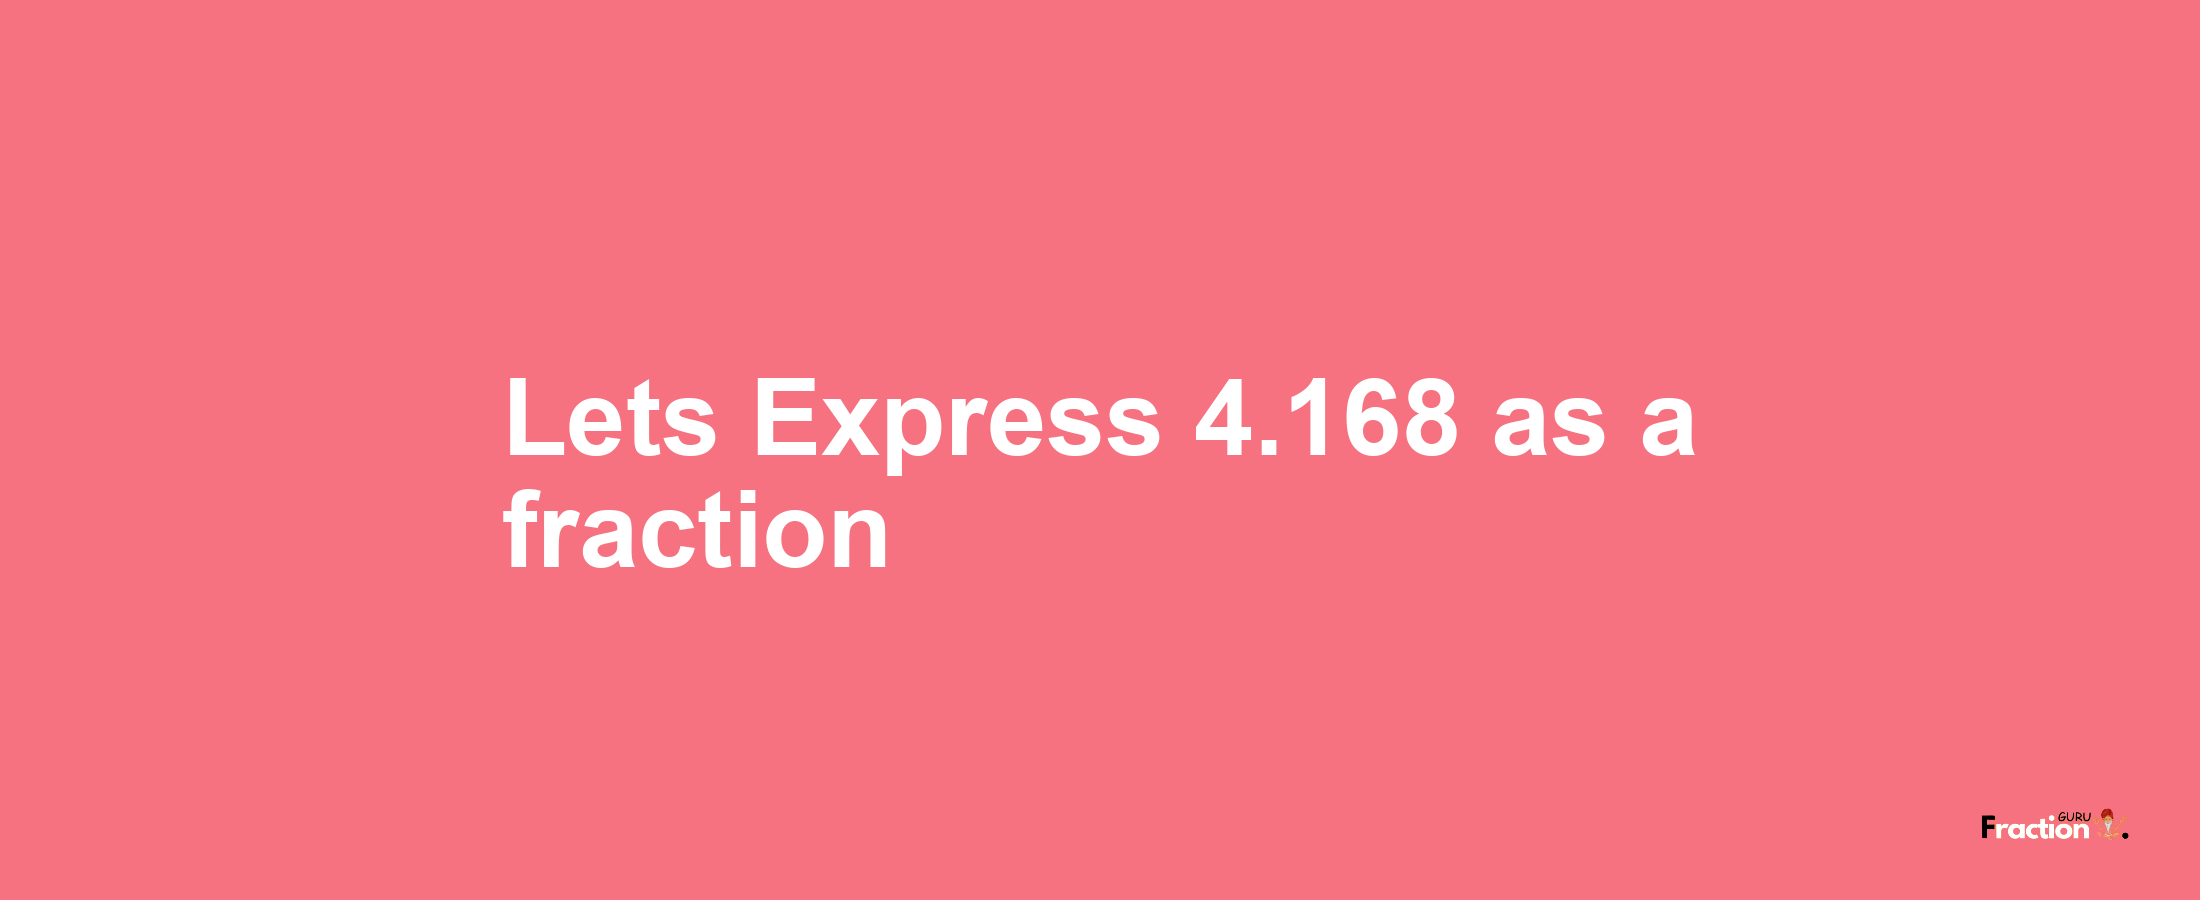 Lets Express 4.168 as afraction